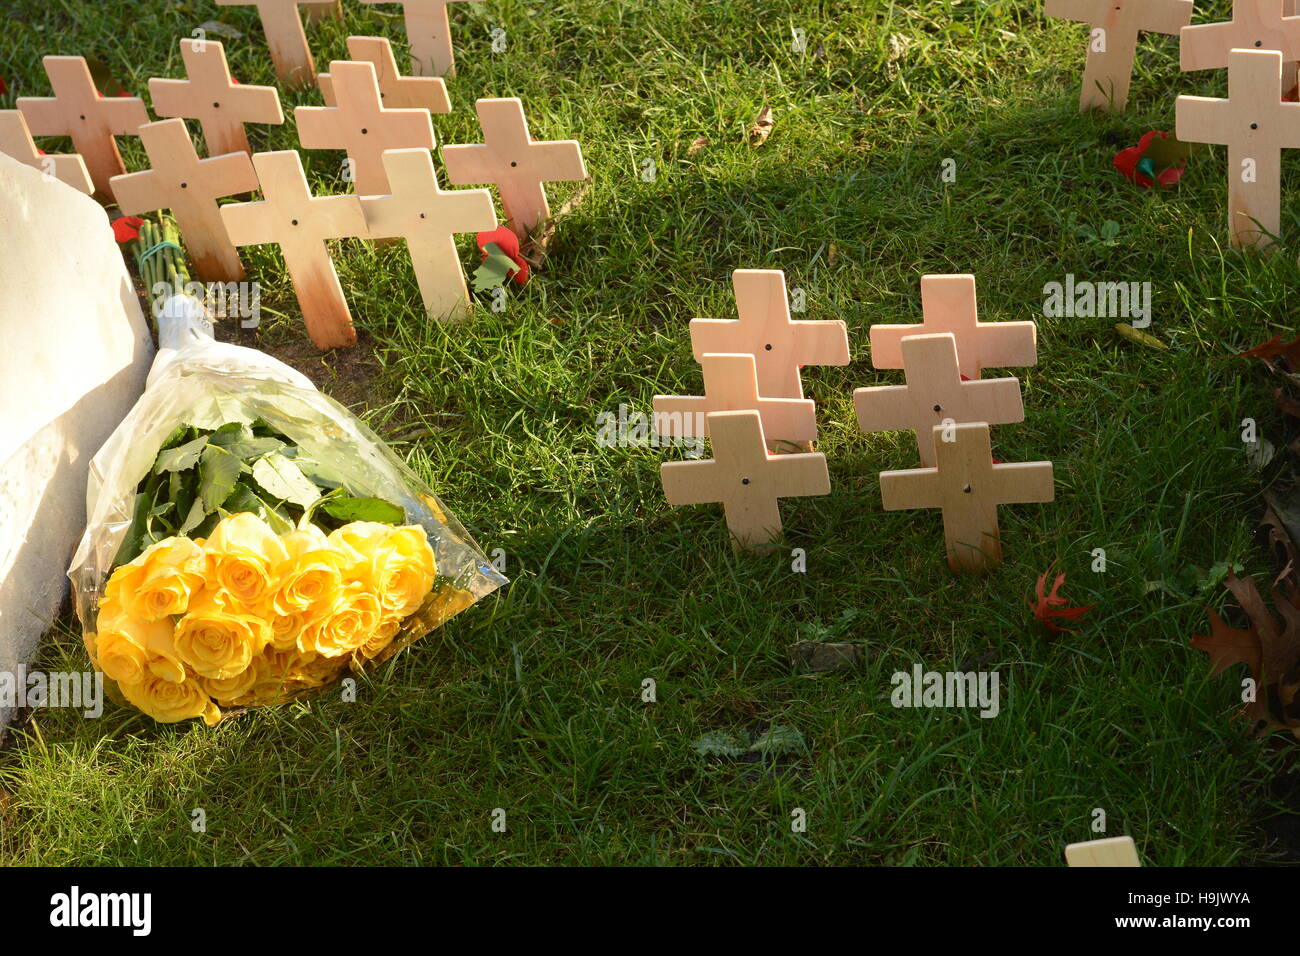 Crosses andd flowers Stock Photo